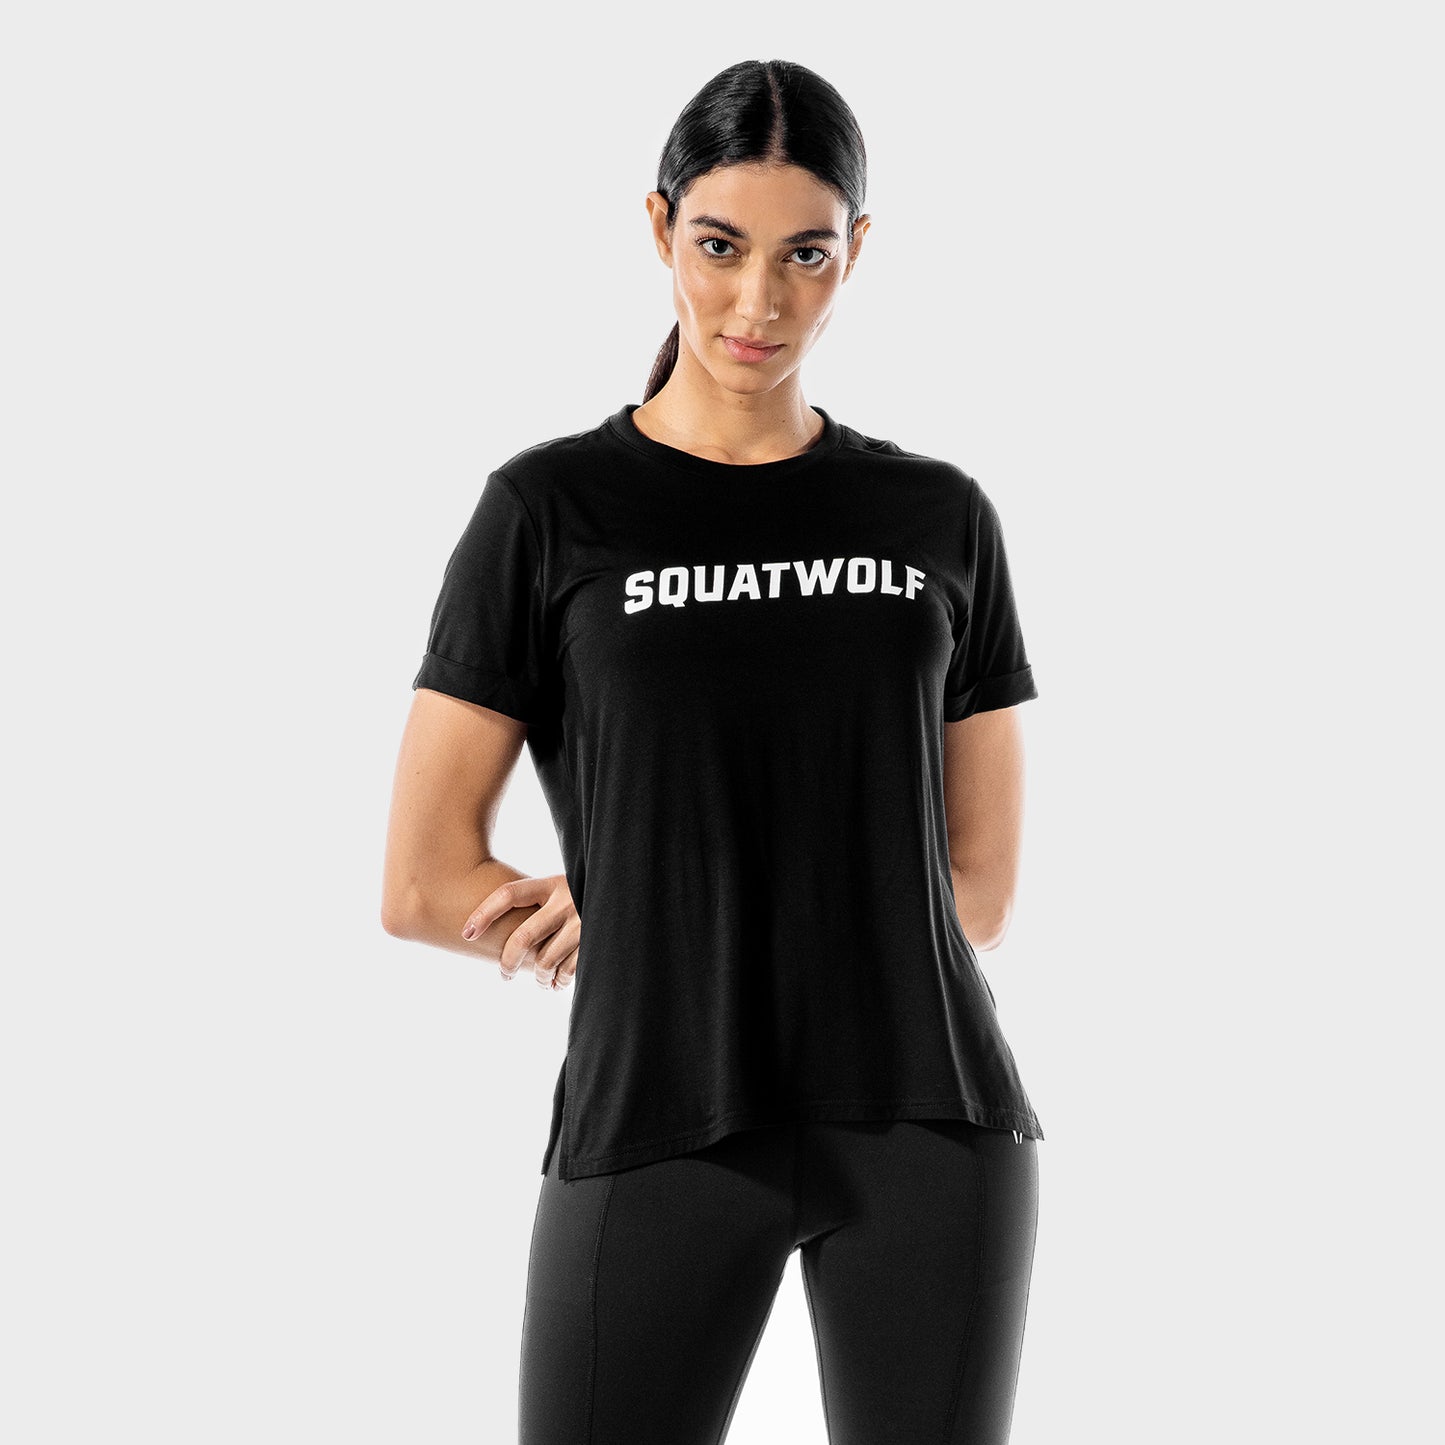 squatwolf-workout-shirts-for-men-new-drop-iconic-tee-black-gym-wear